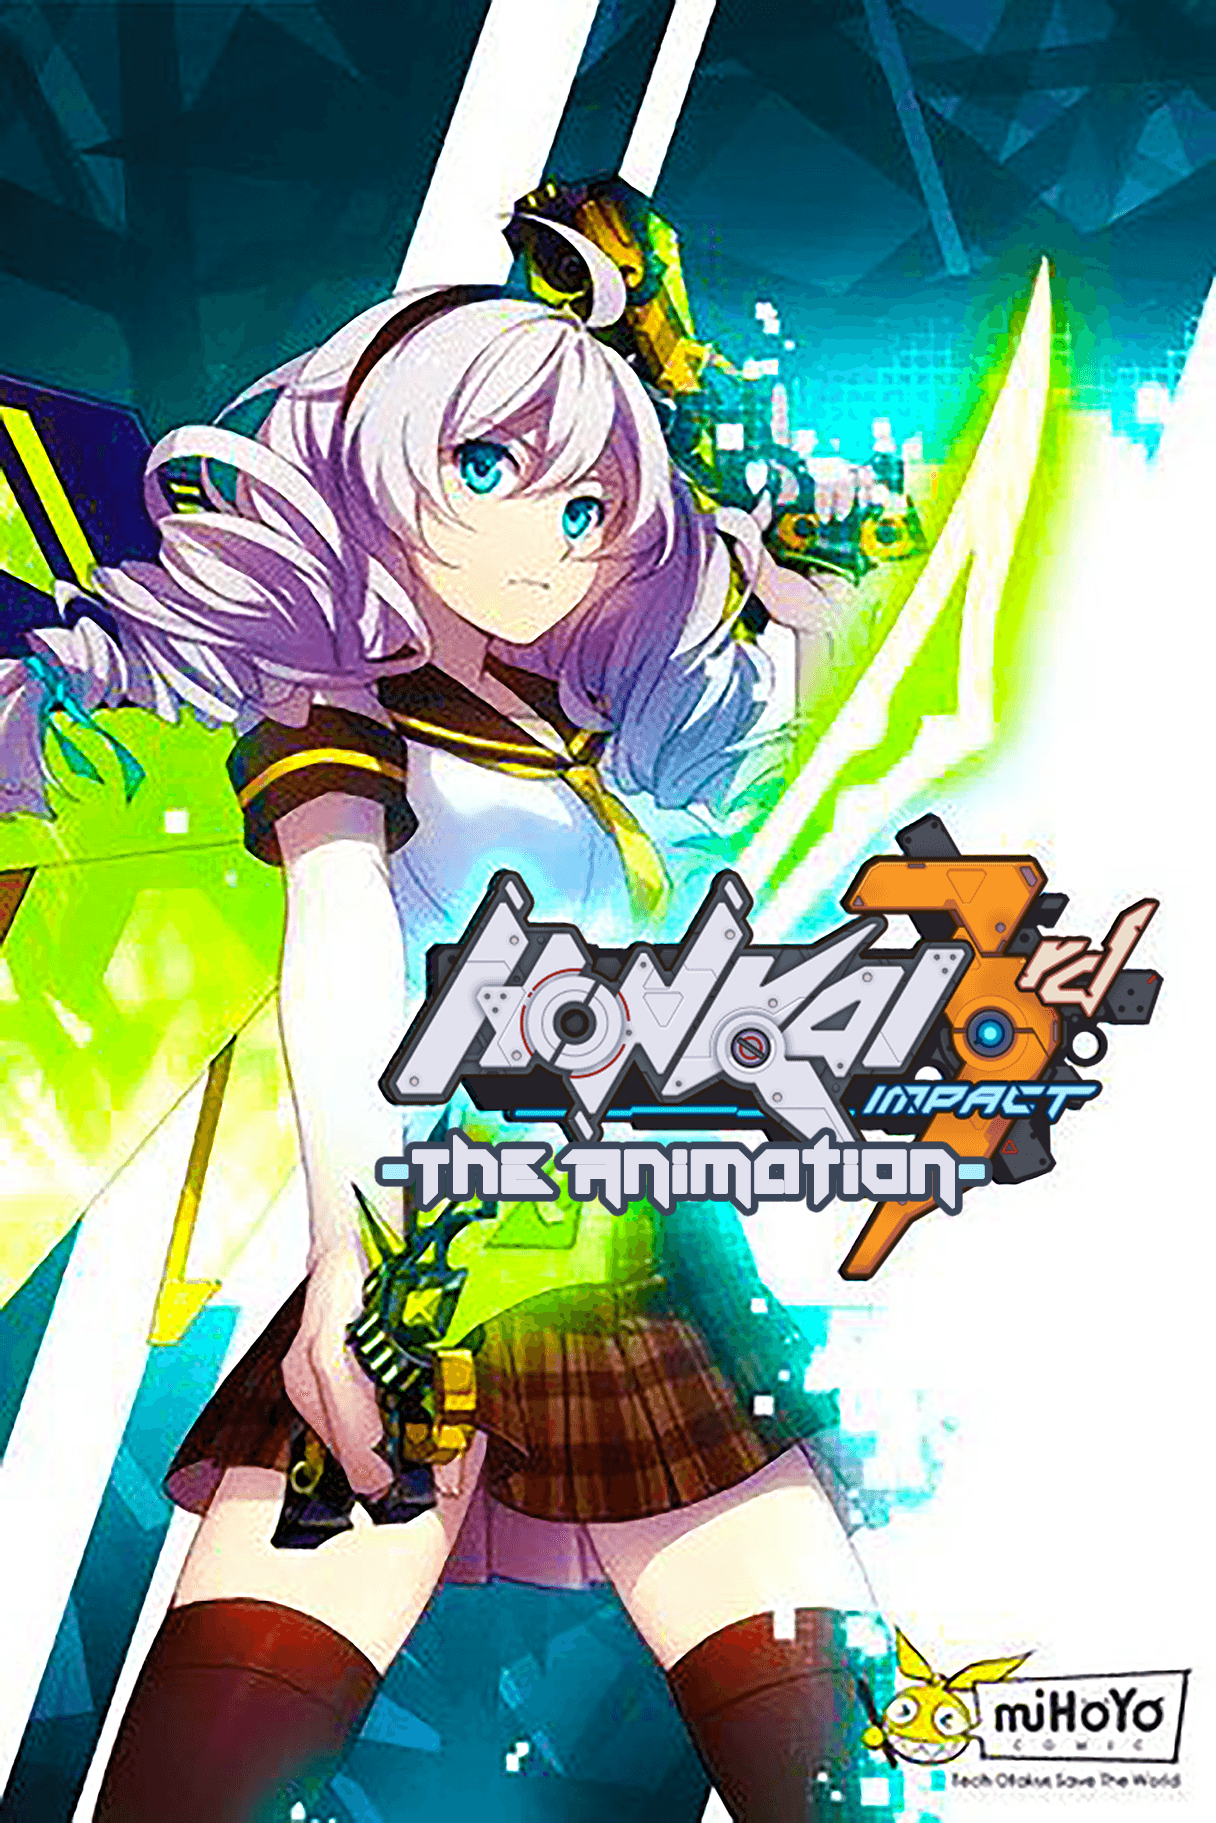 Honkai Impact 3rd Gets TwoPart Anime Celebrating the Lunar New Year